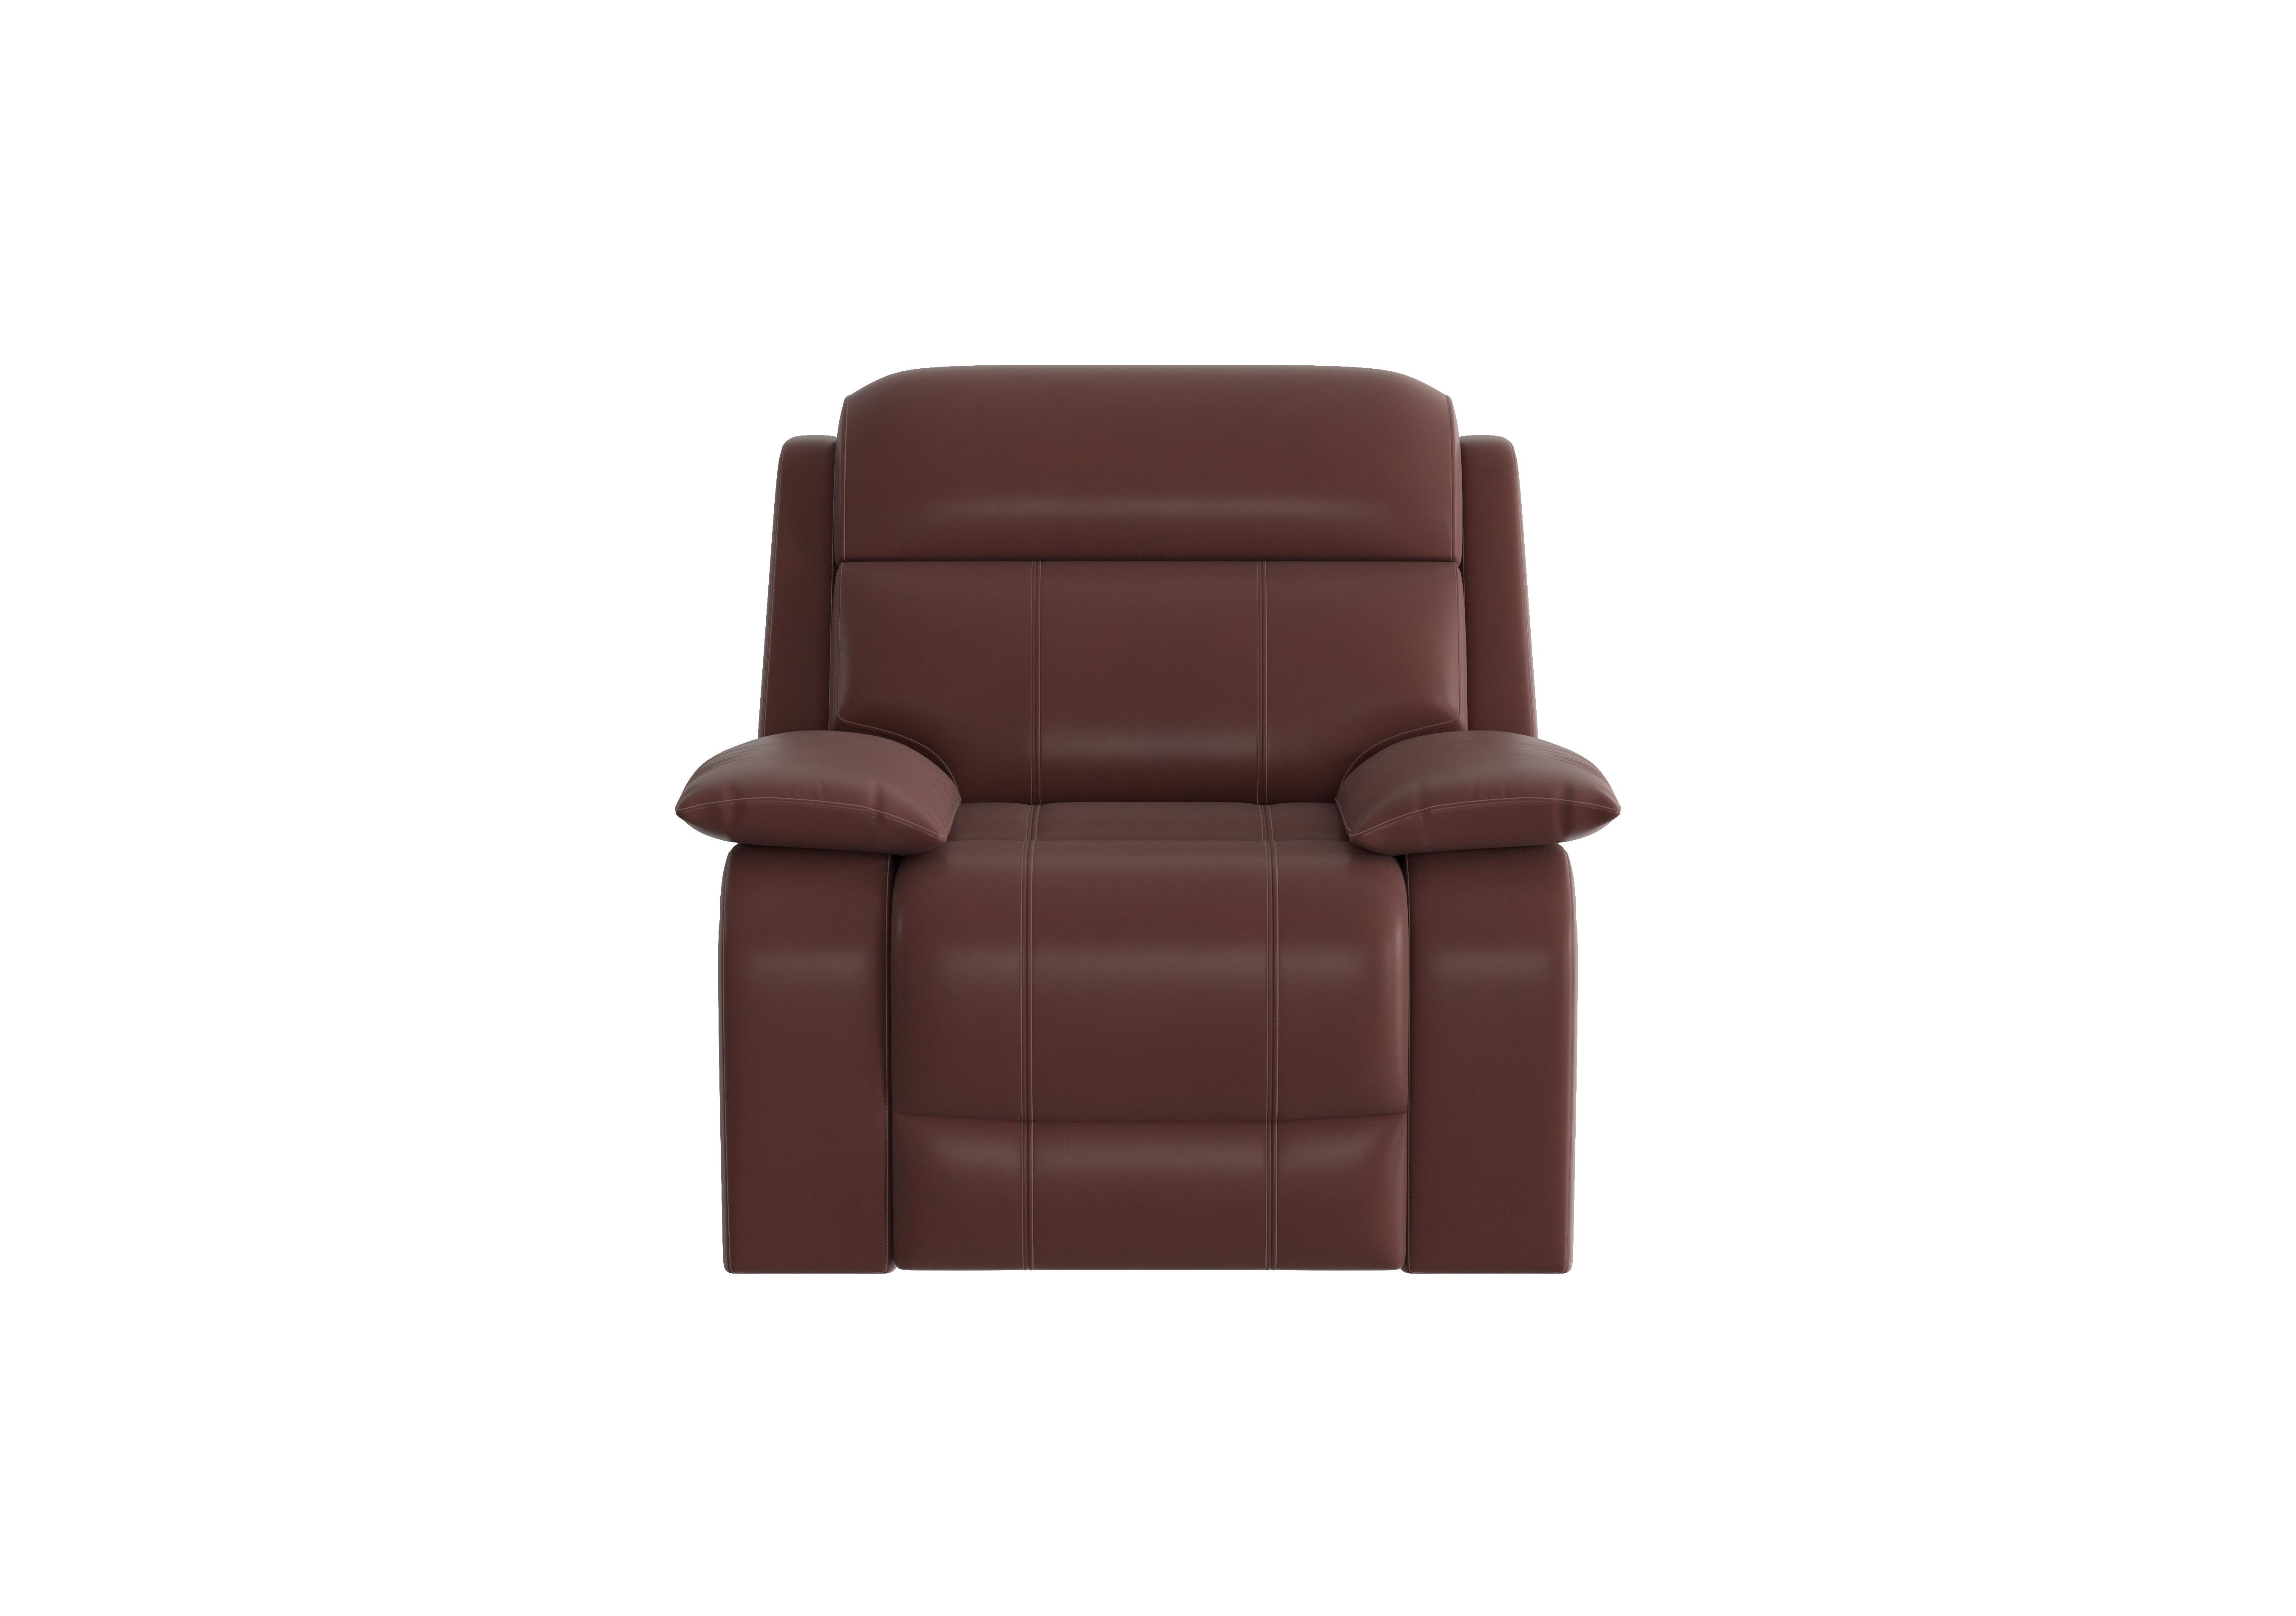 Moreno Leather Power Recliner Armchair with Power Headrest in An-751b Burgundy on Furniture Village